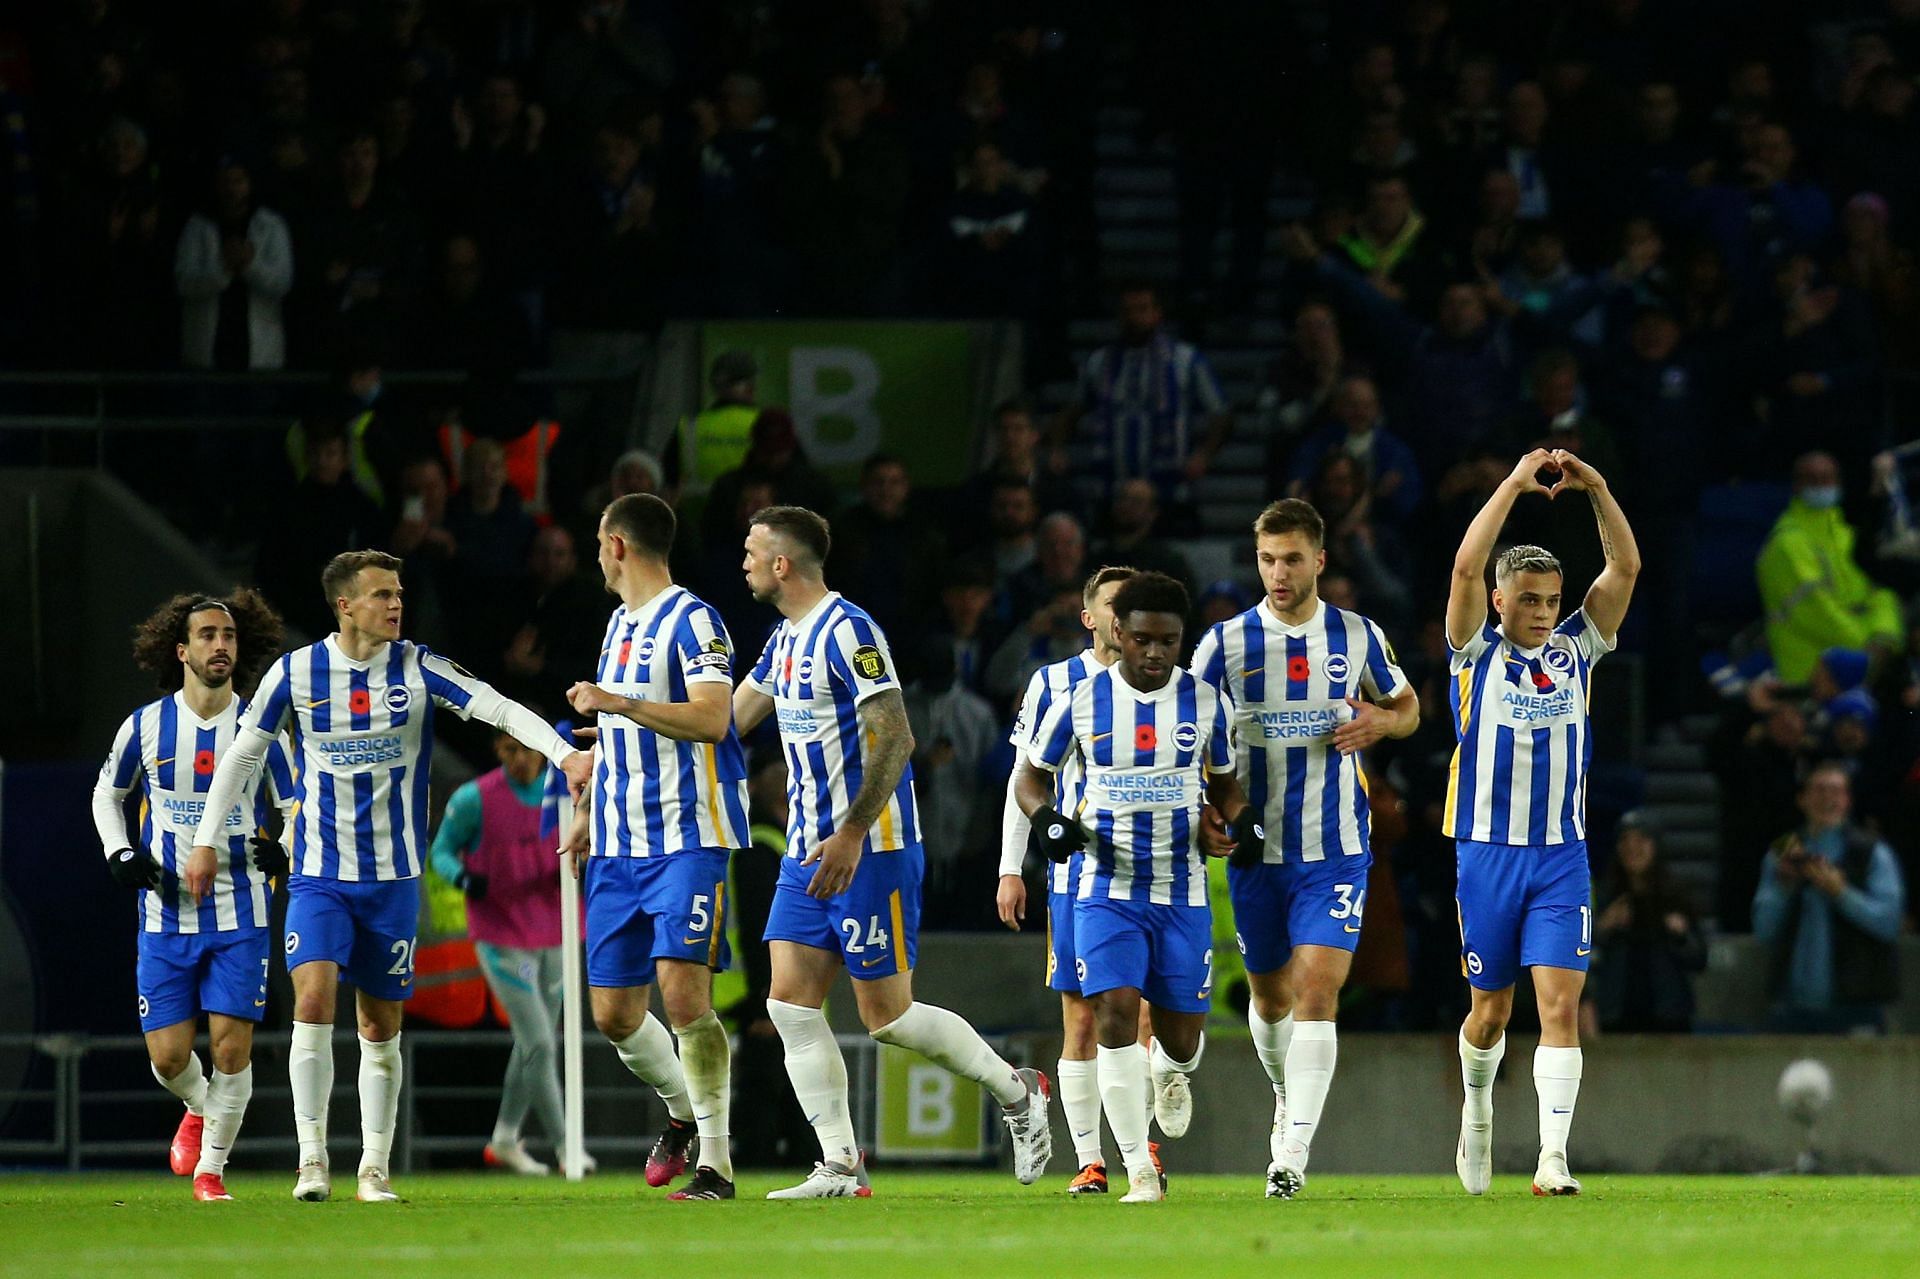 Brighton are looking to get back on track